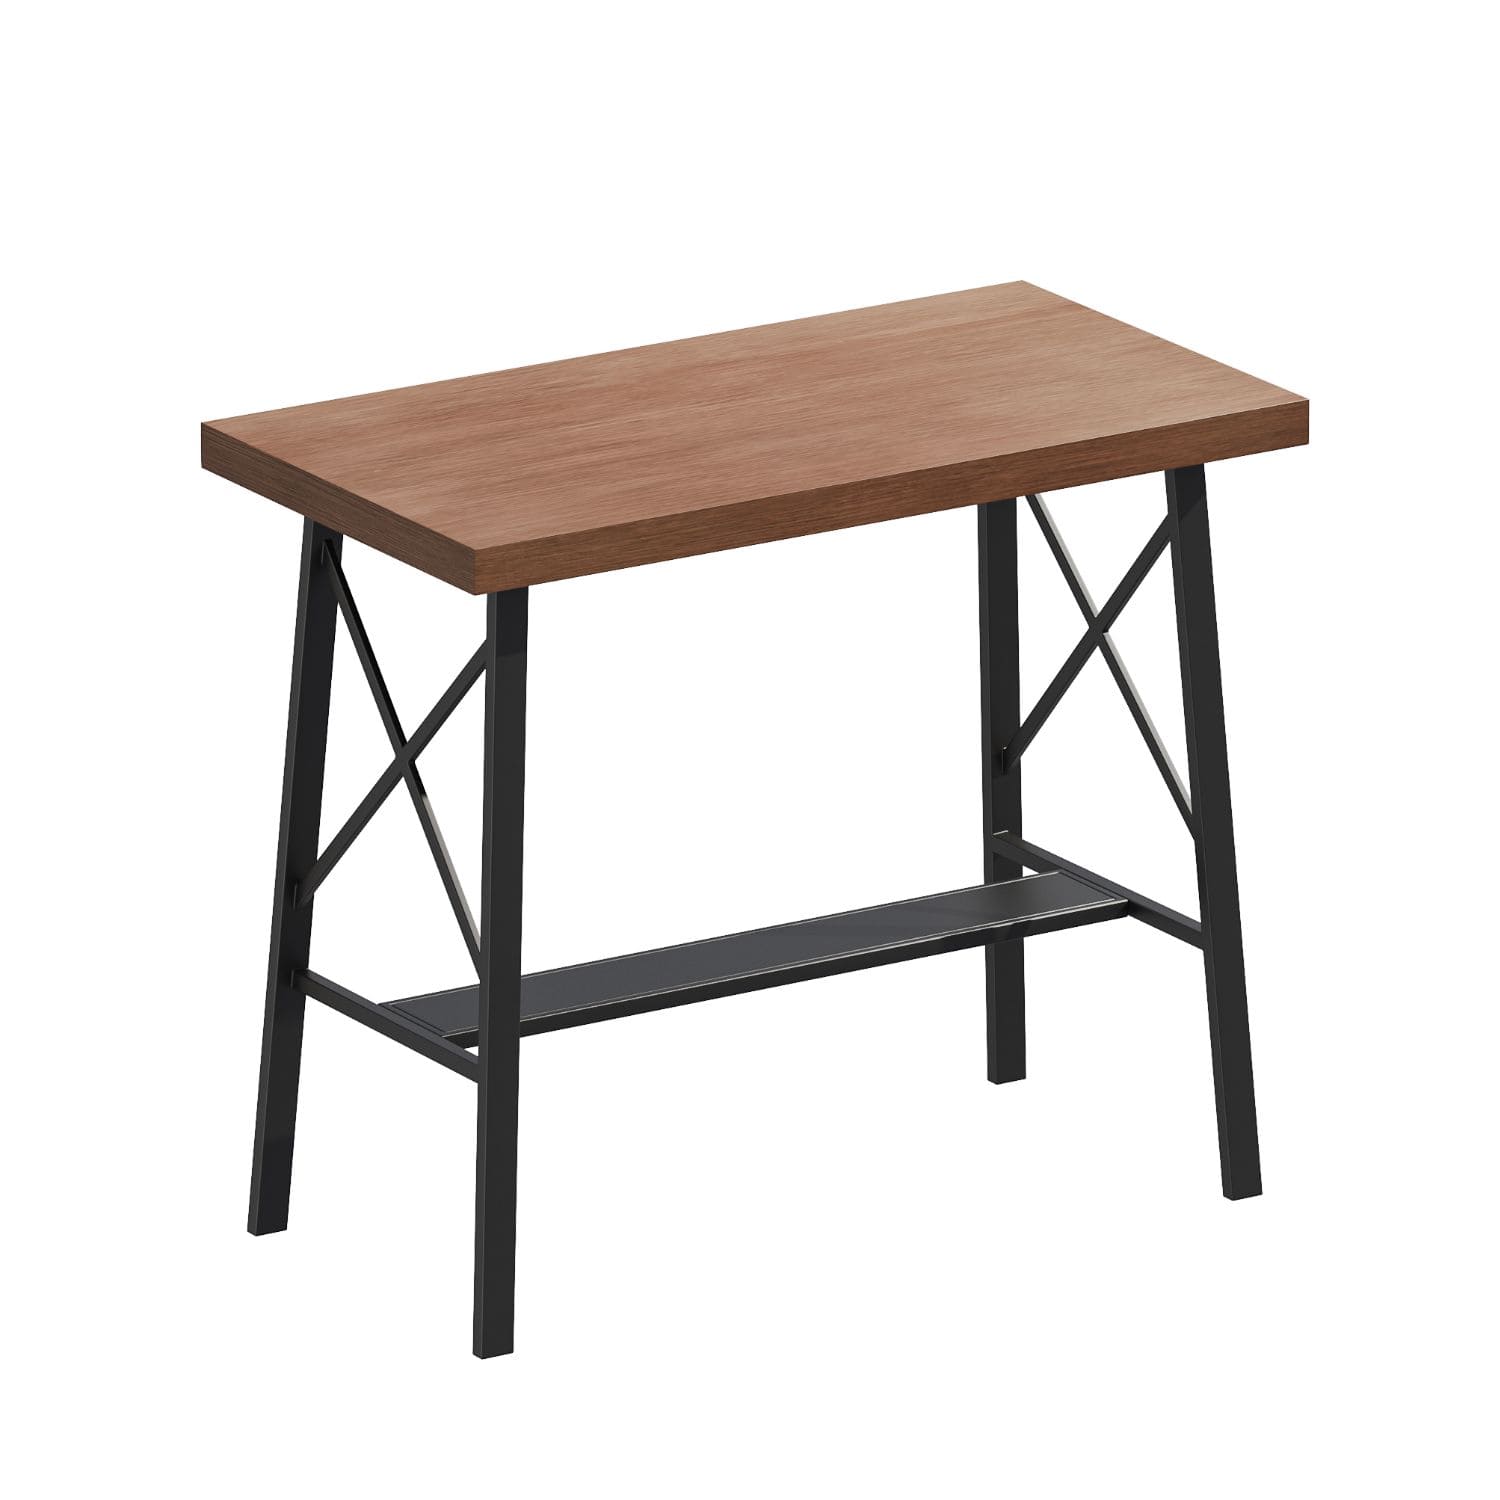 Vicllax Patio Rectangle Bar Table, Outdoor Bar Height Pub Table